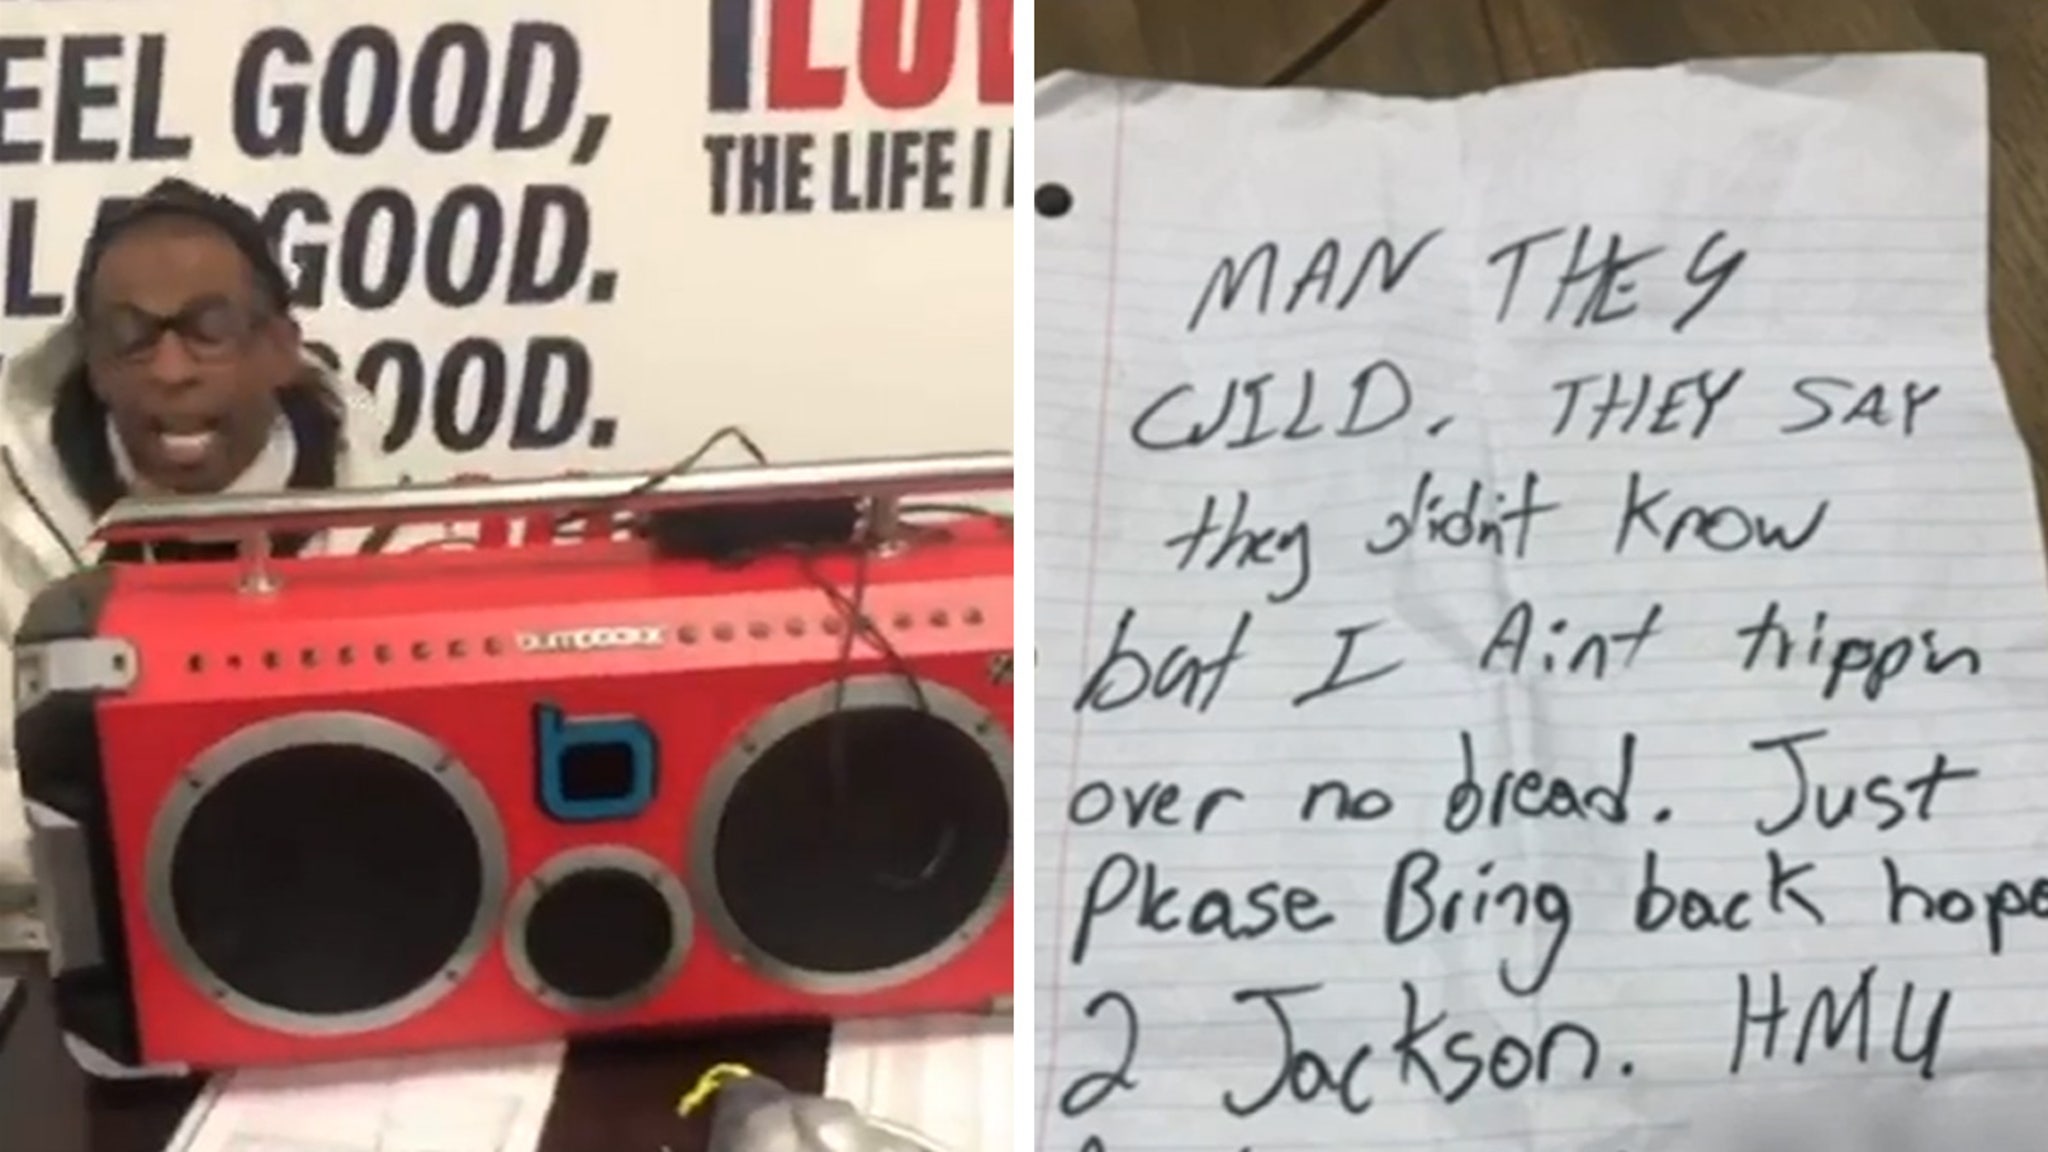 Deion Sanders’ Priceless Boombox returned after being stolen from a truck, ‘God Is Good’